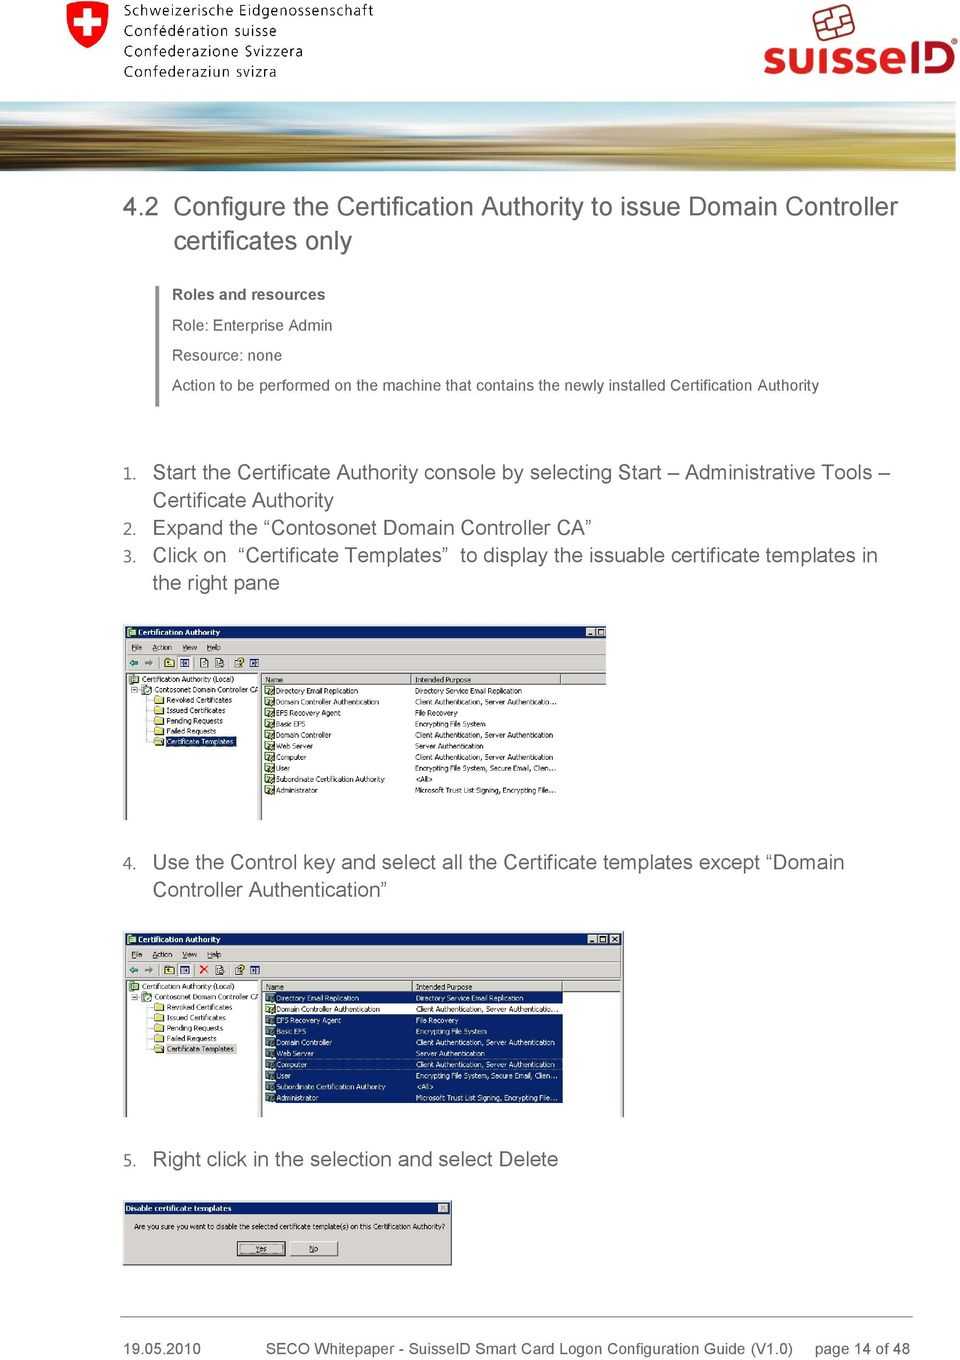 Seco Whitepaper. Suisseid Smart Card Logon Configuration Intended For Domain Controller Certificate Template